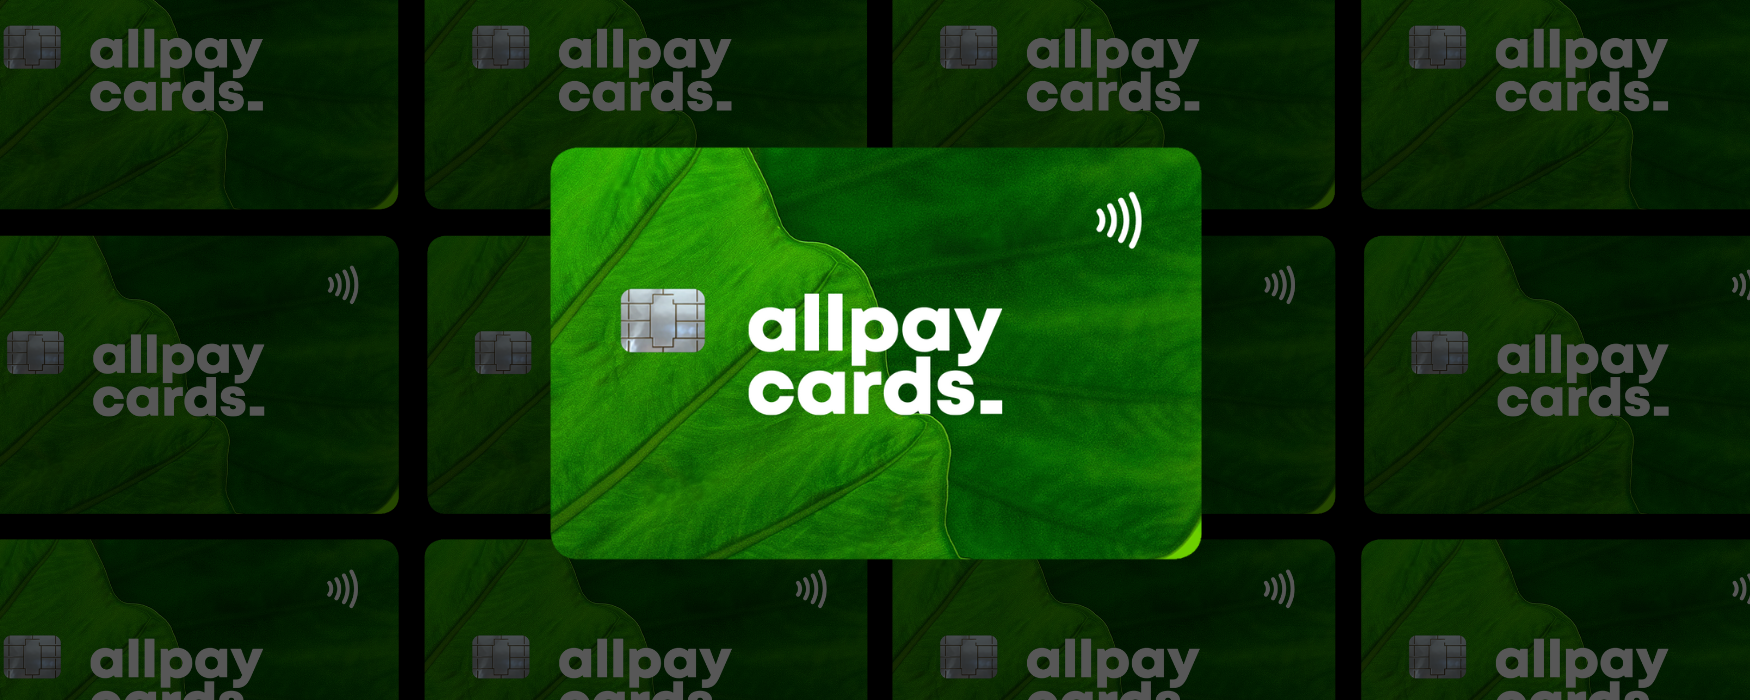 allpay Limited achieves Mastercard Sustainability Badge 